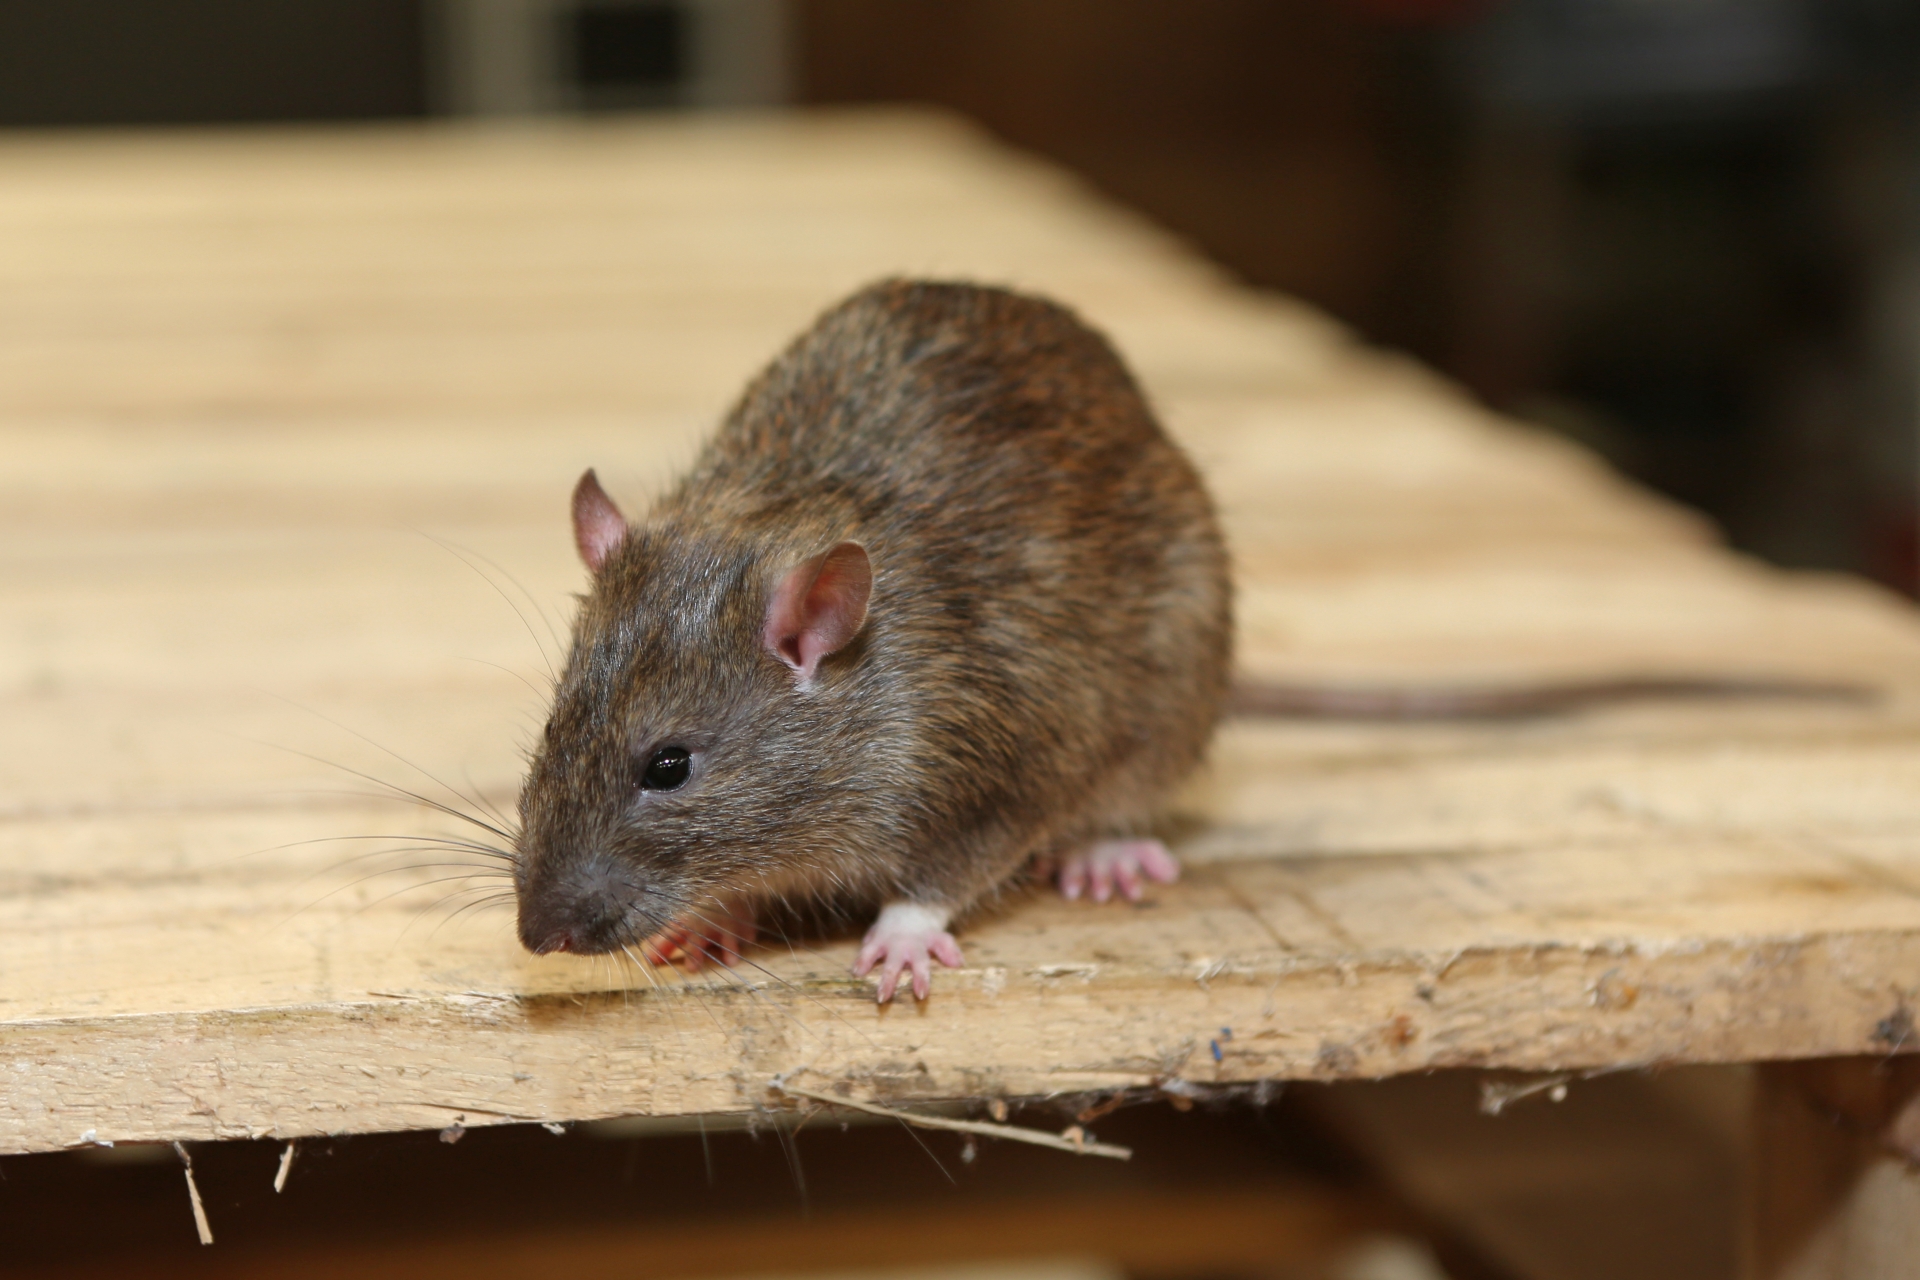 Rat extermination, Pest Control in Hornsey, N8. Call Now 020 8166 9746